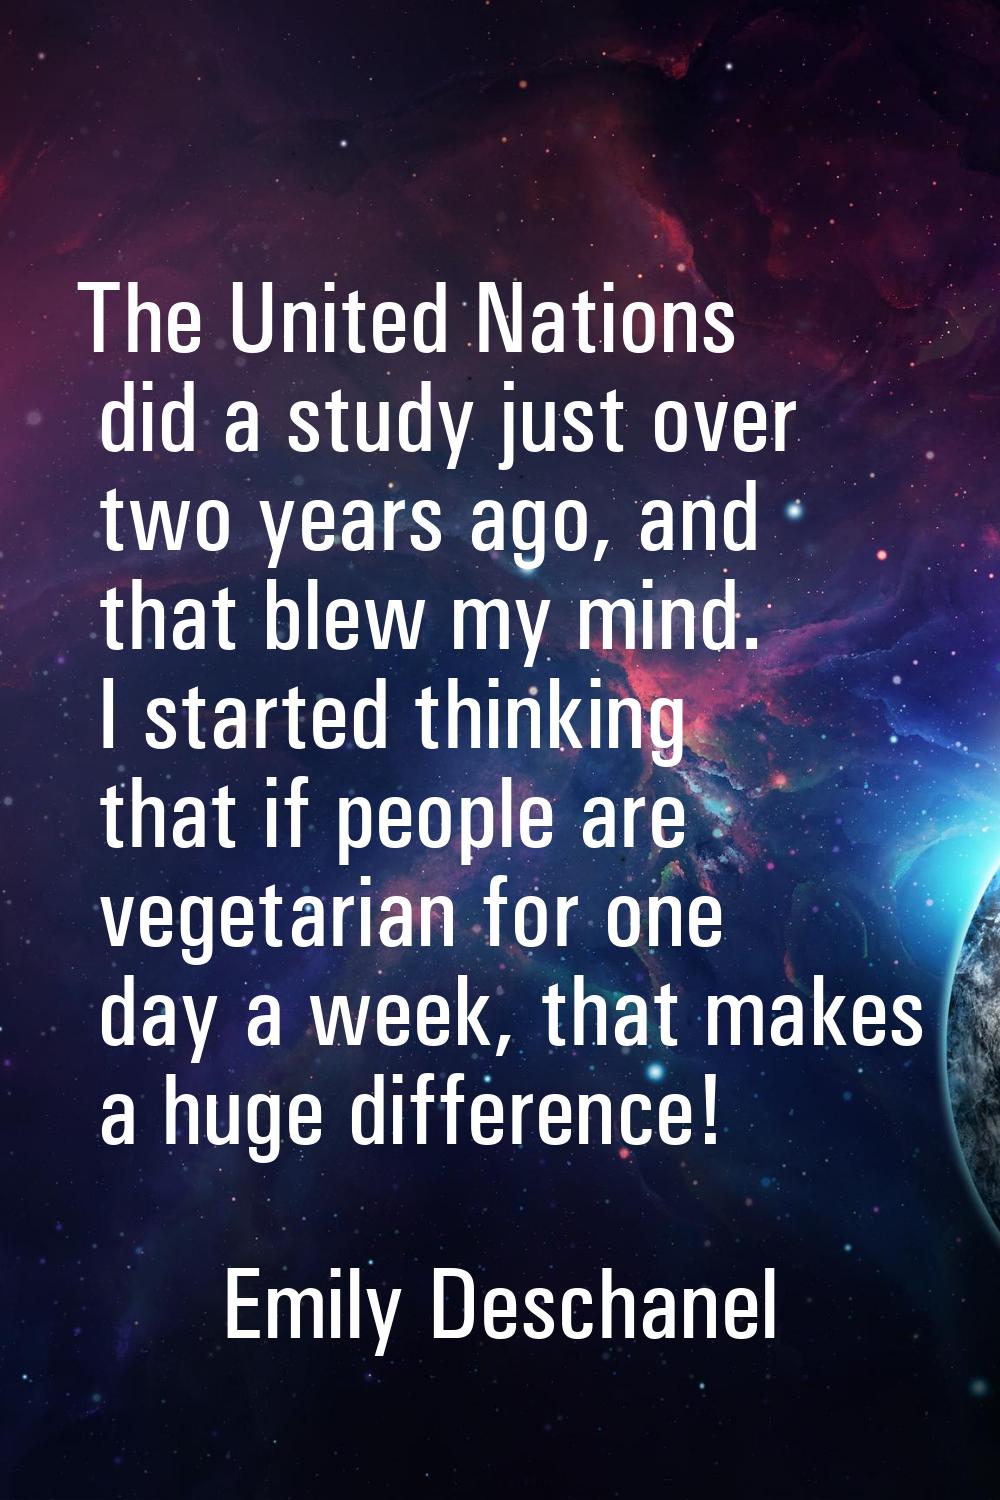 The United Nations did a study just over two years ago, and that blew my mind. I started thinking t